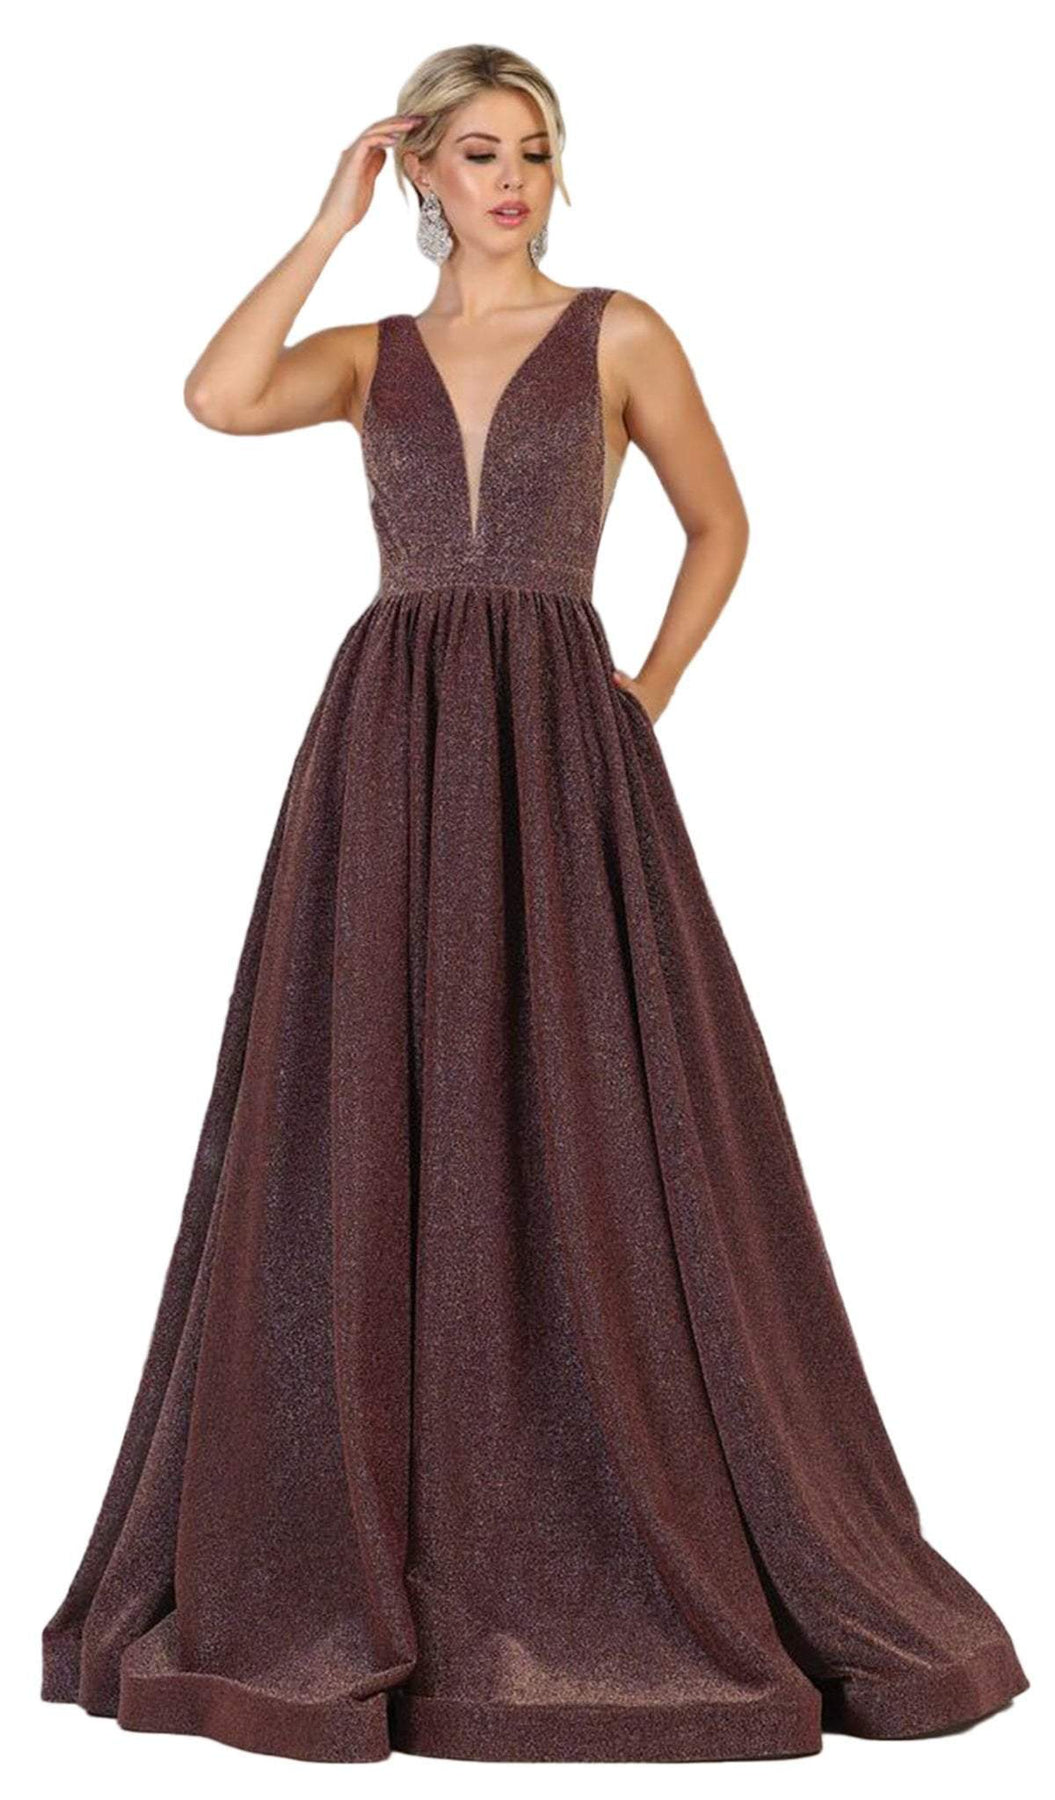 May Queen - RQ7753 Sleeveless Deep V-neck A-line Dress Special Occasion Dress 4 / Mauve/Gold